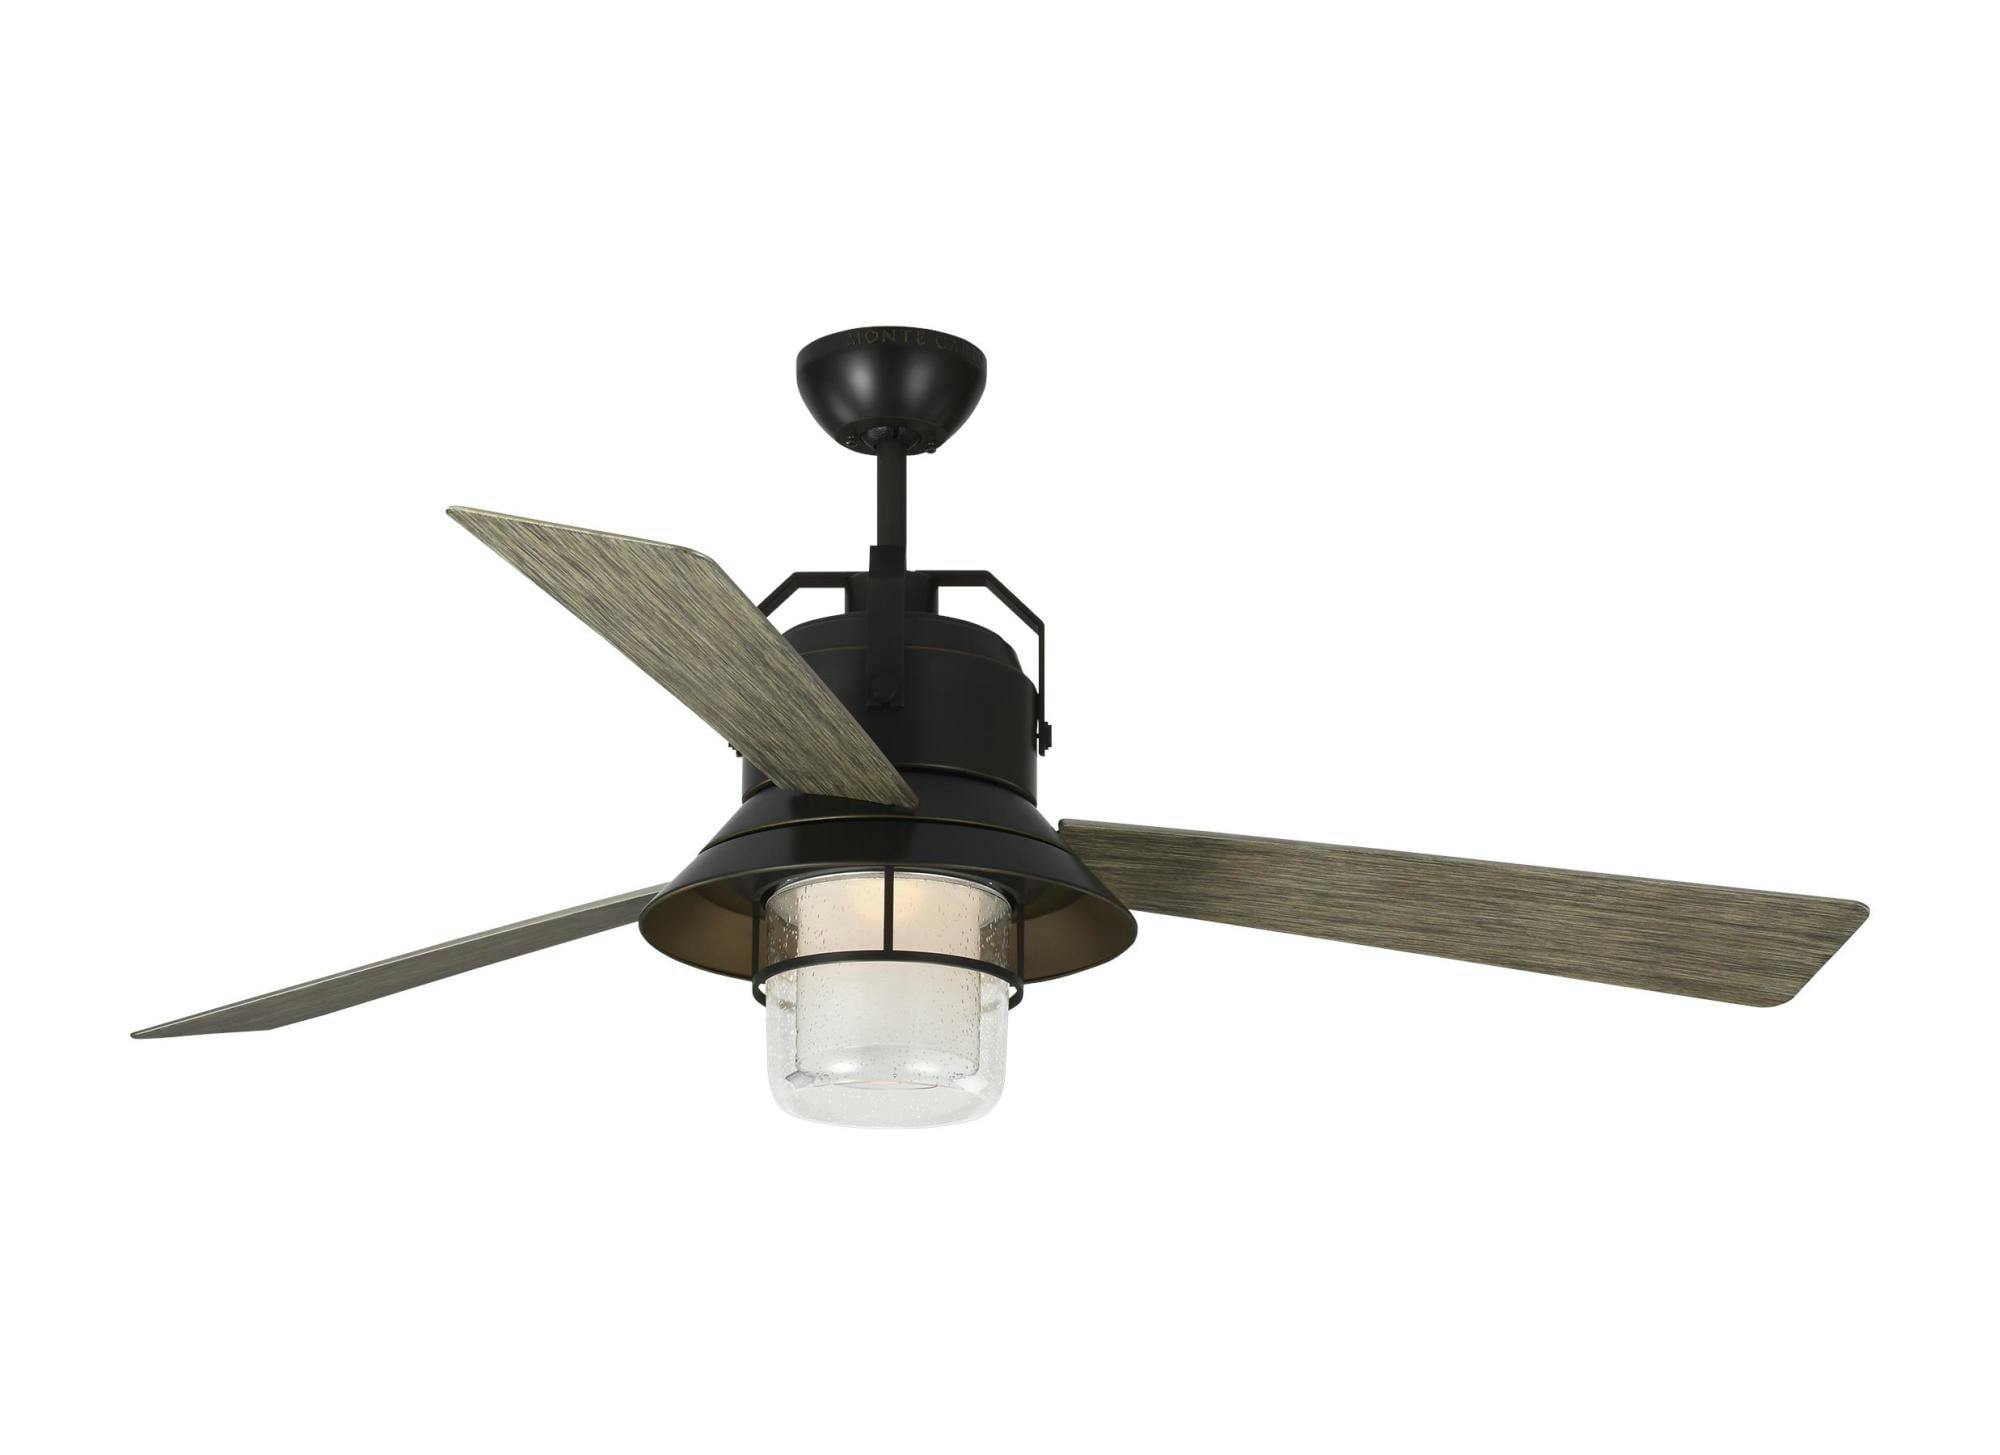 Boynton 54" Antique Bronze LED Outdoor Ceiling Fan with Remote